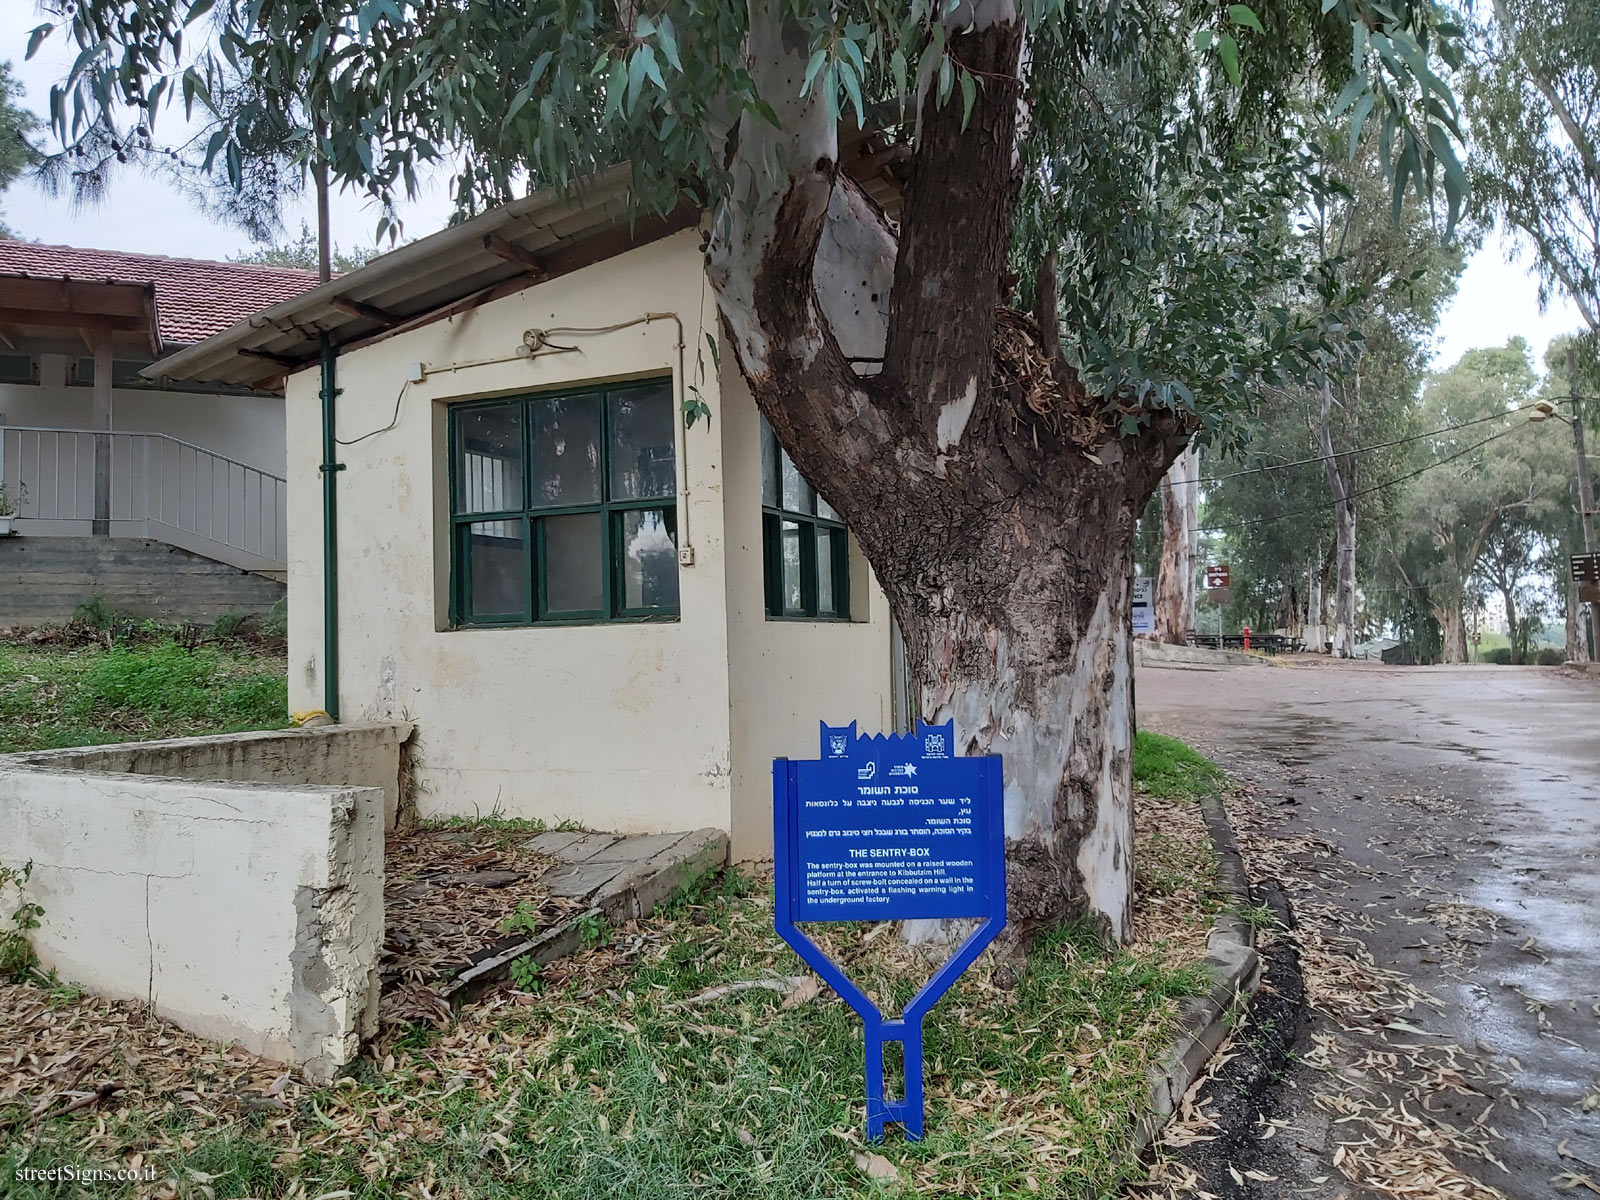 Rehovot - Heritage Sites in Israel - Ayalon Institute - The Sentry-box - David Fikes St 1, Rehovot, Israel